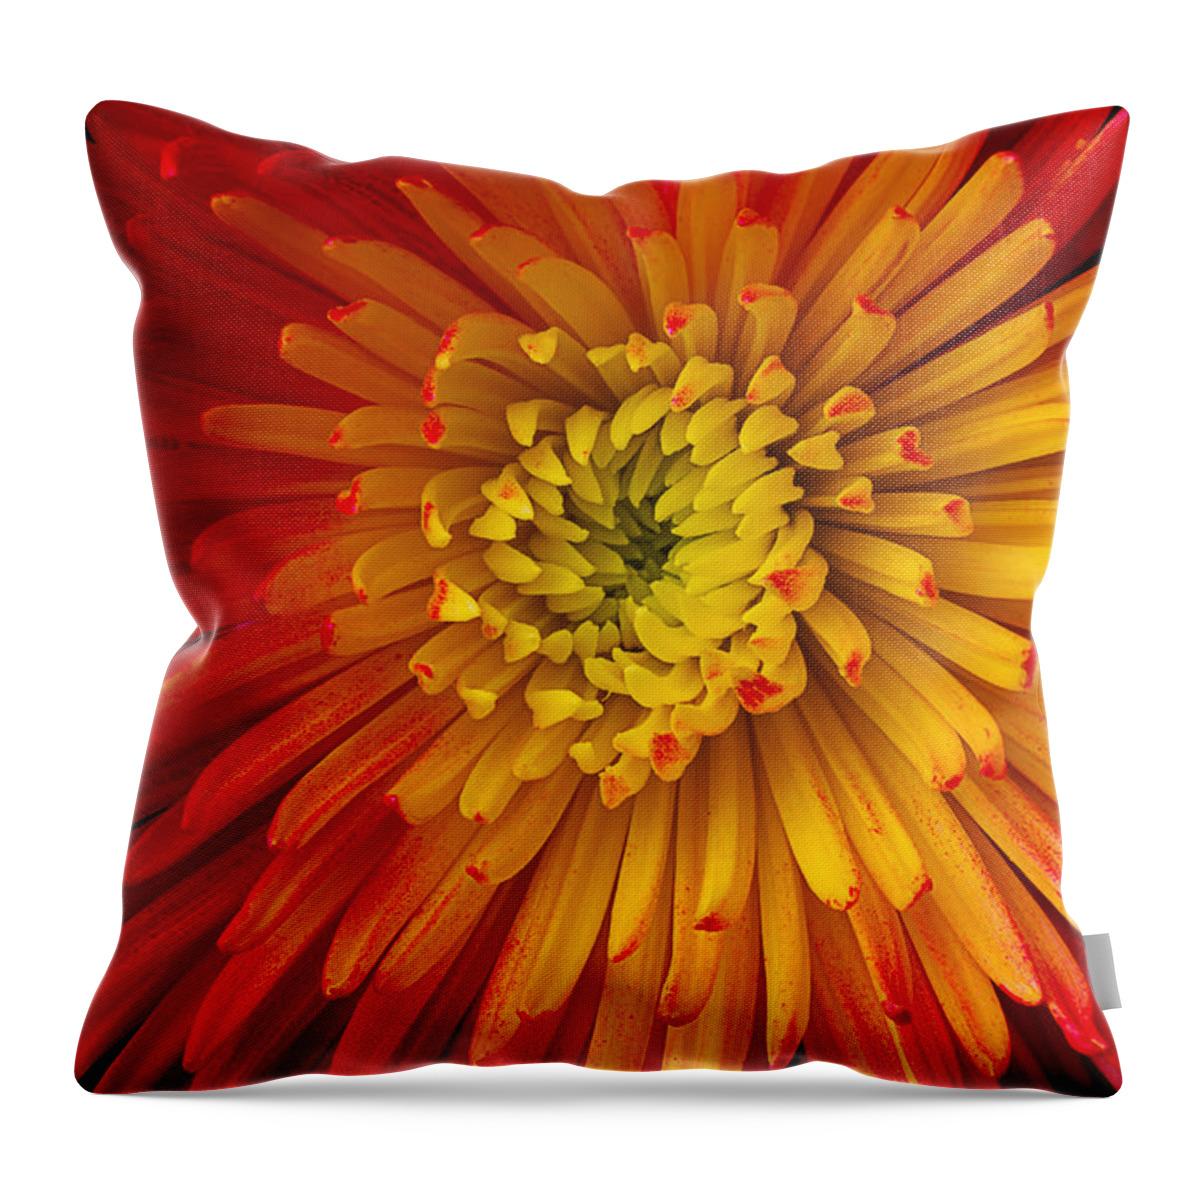 Red Yellow Spider Throw Pillow featuring the photograph Yellow Red Spider Mum by Garry Gay